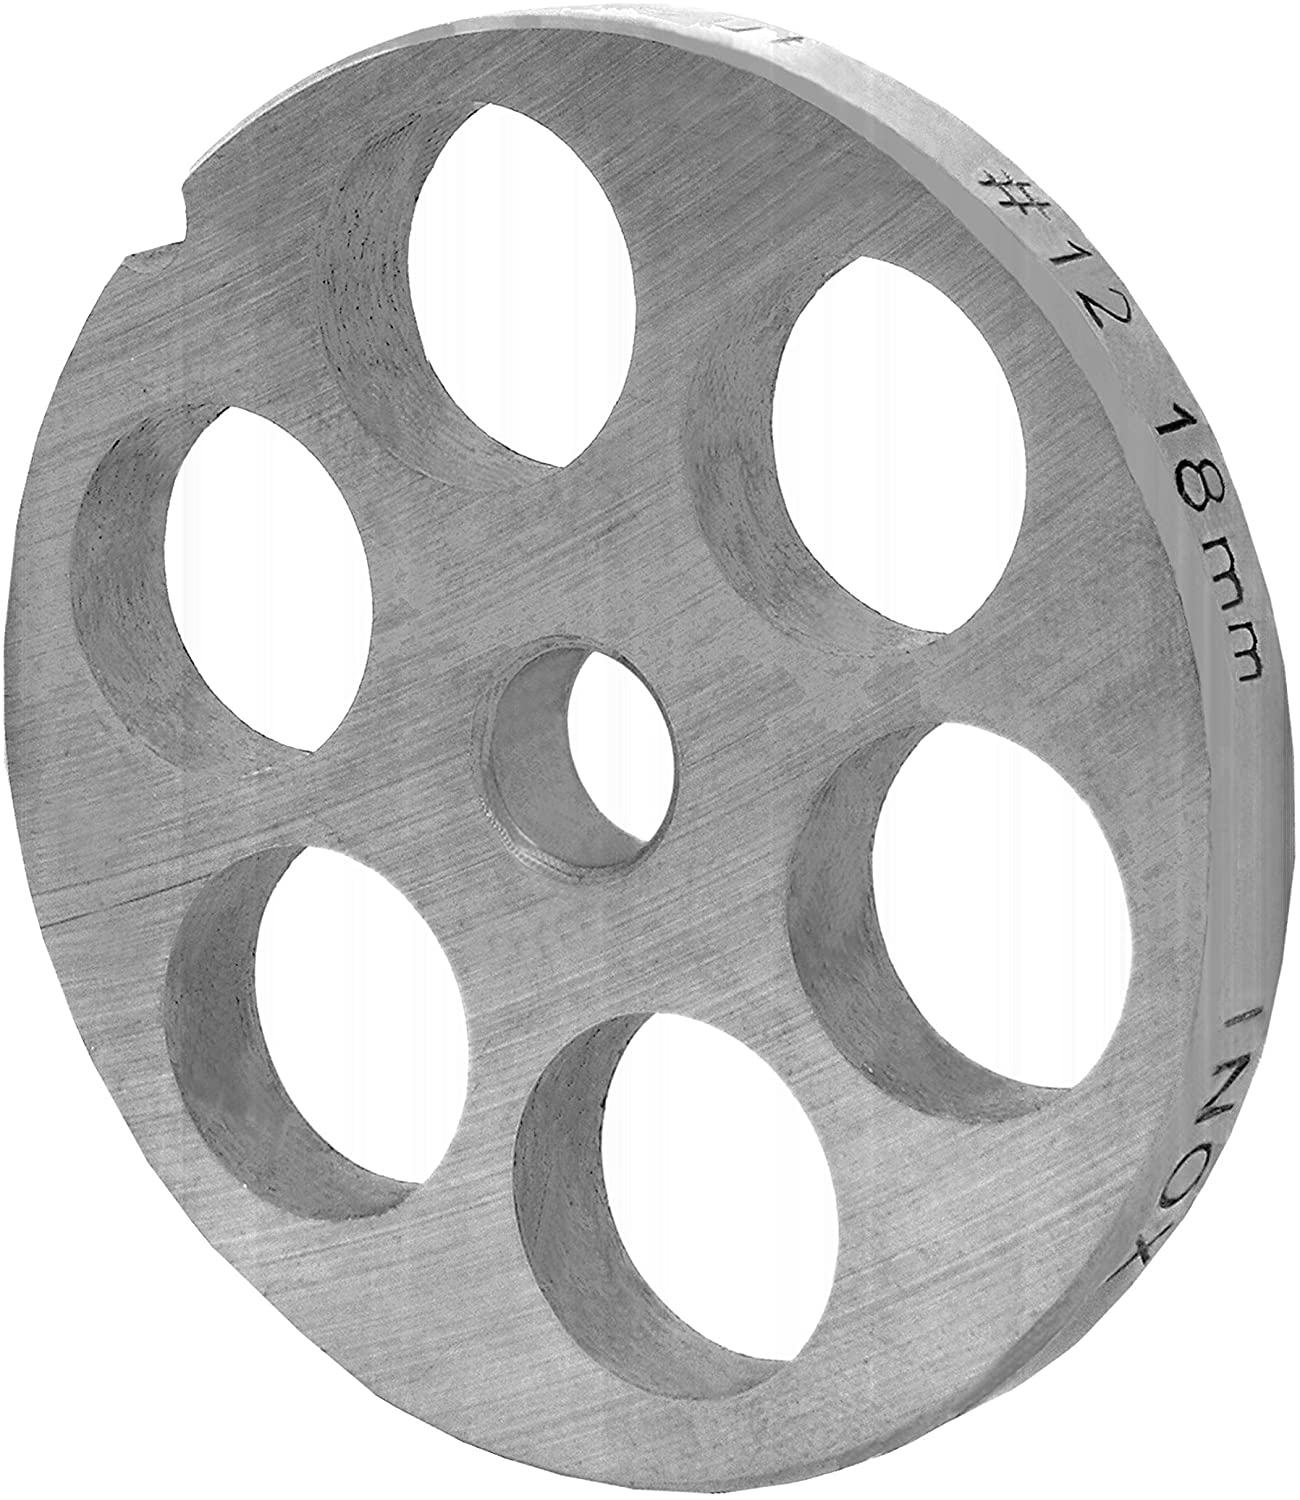 WolfCut Meat Grinder Discs Suitable For Reber Sizes 12 (18.0 Mm)